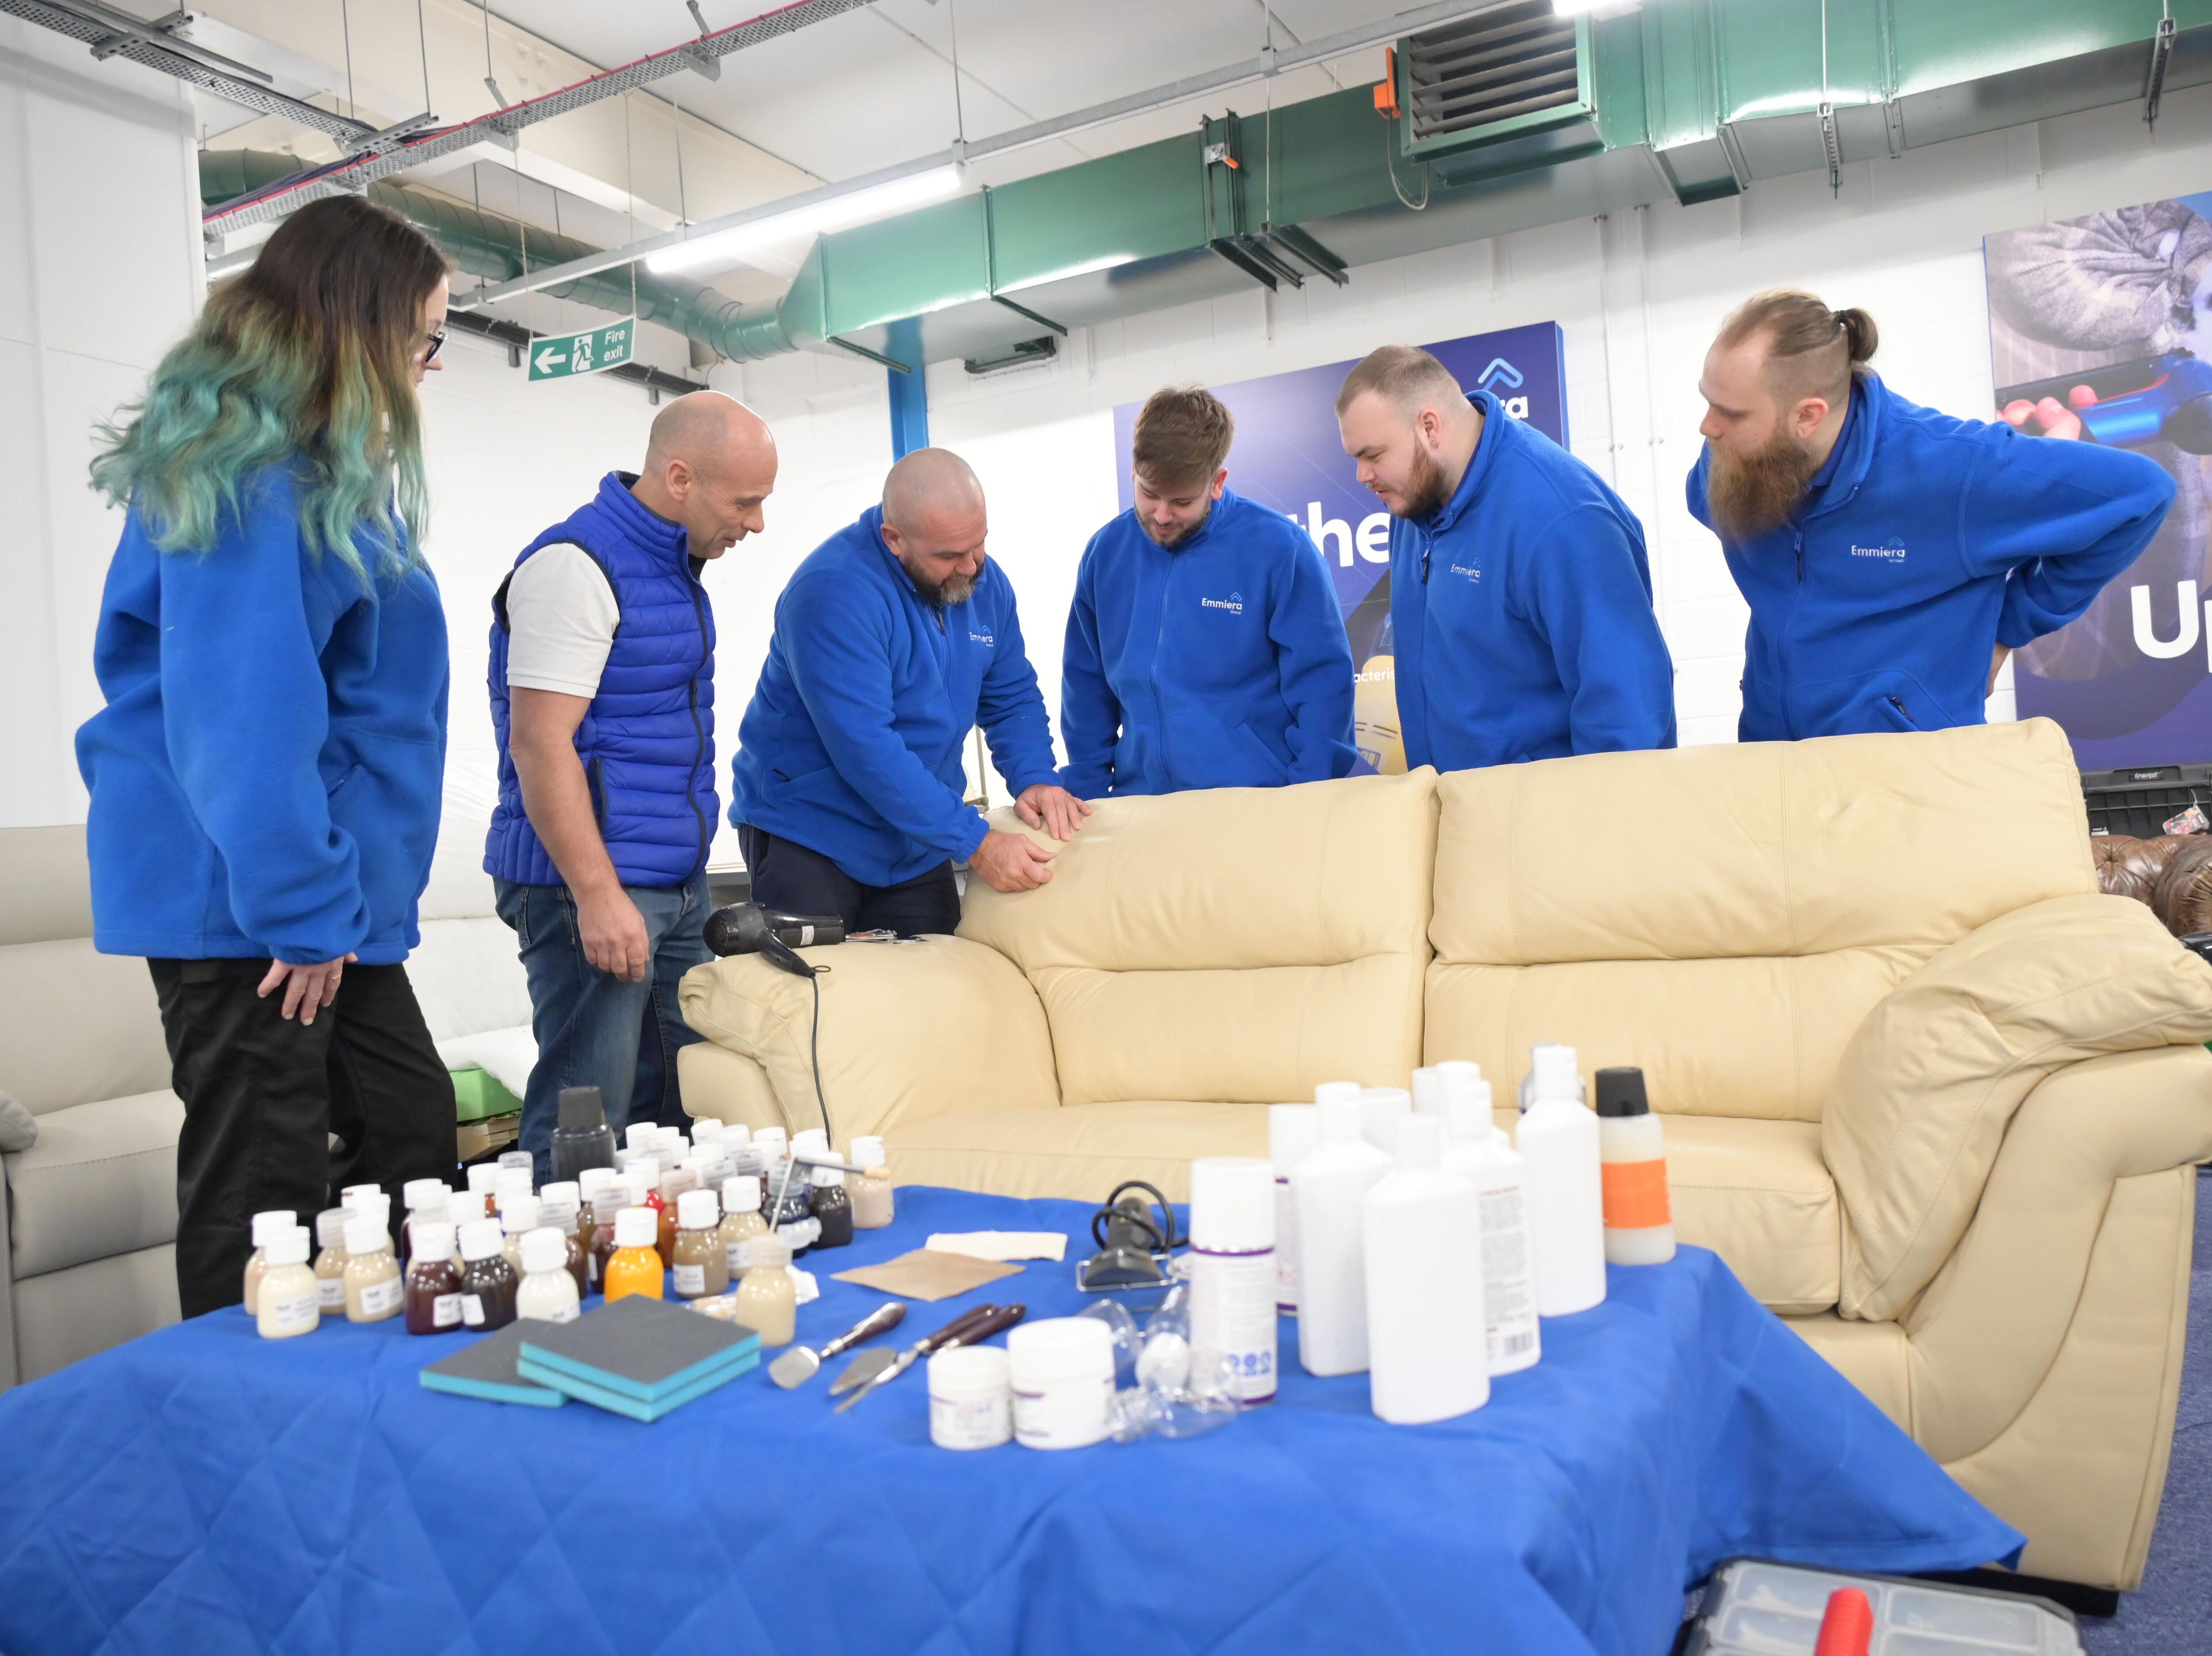 Furniture repair specialists join The Furniture Makers’ Company